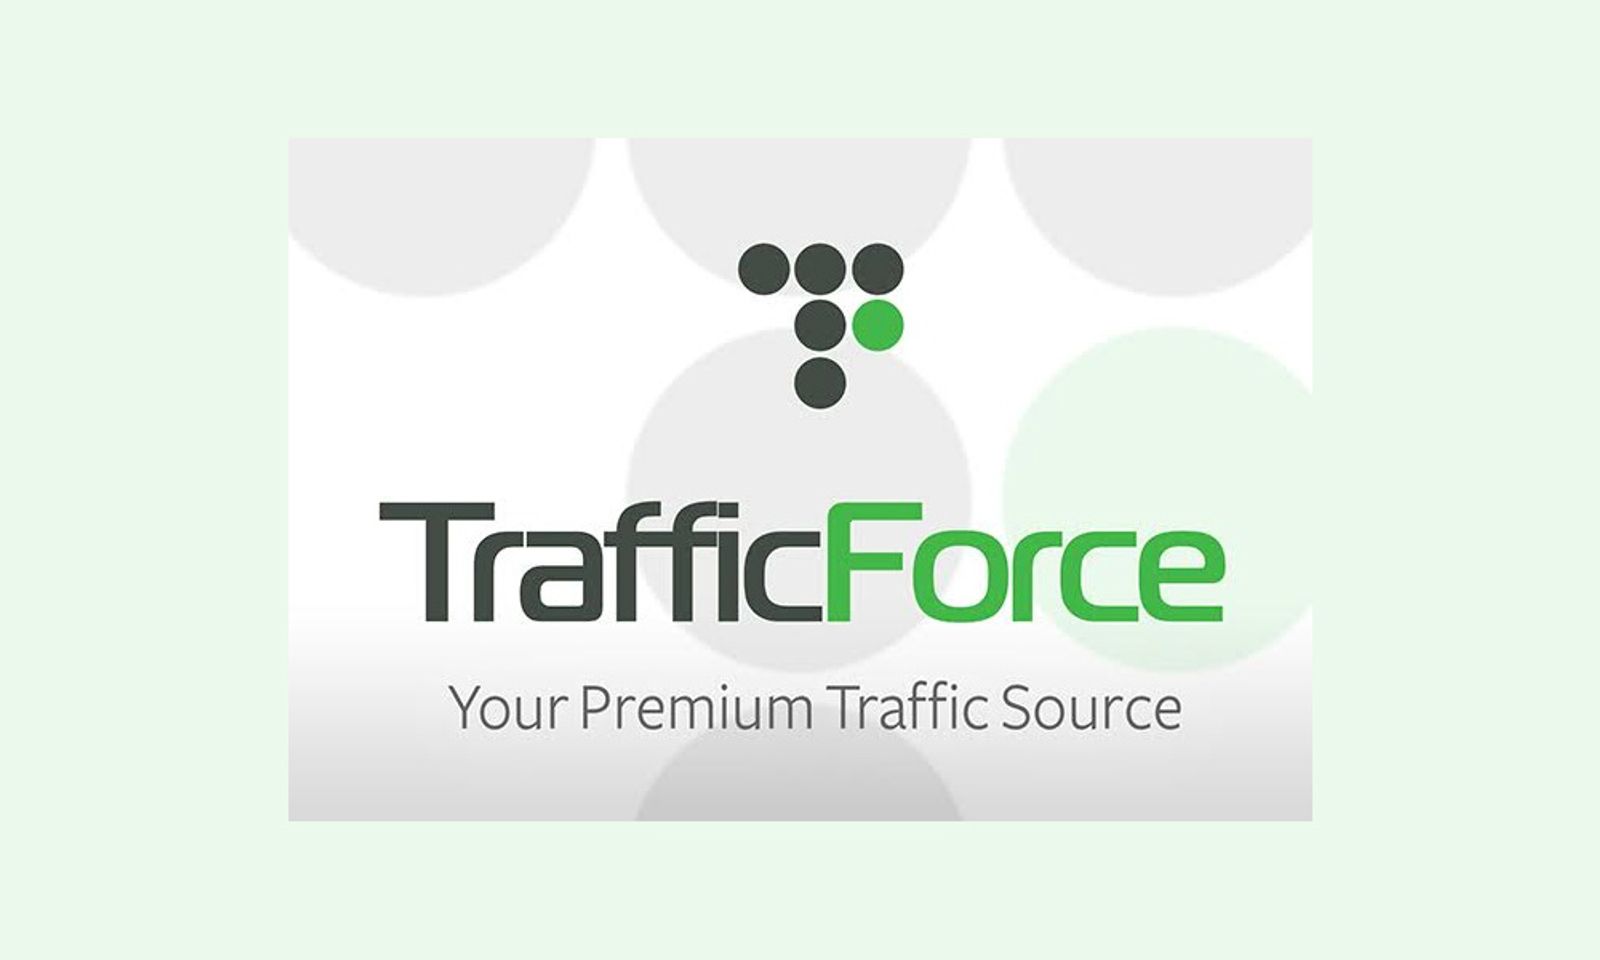 New Ad Zone White Listing Tool Offered to Traffic Force Clients